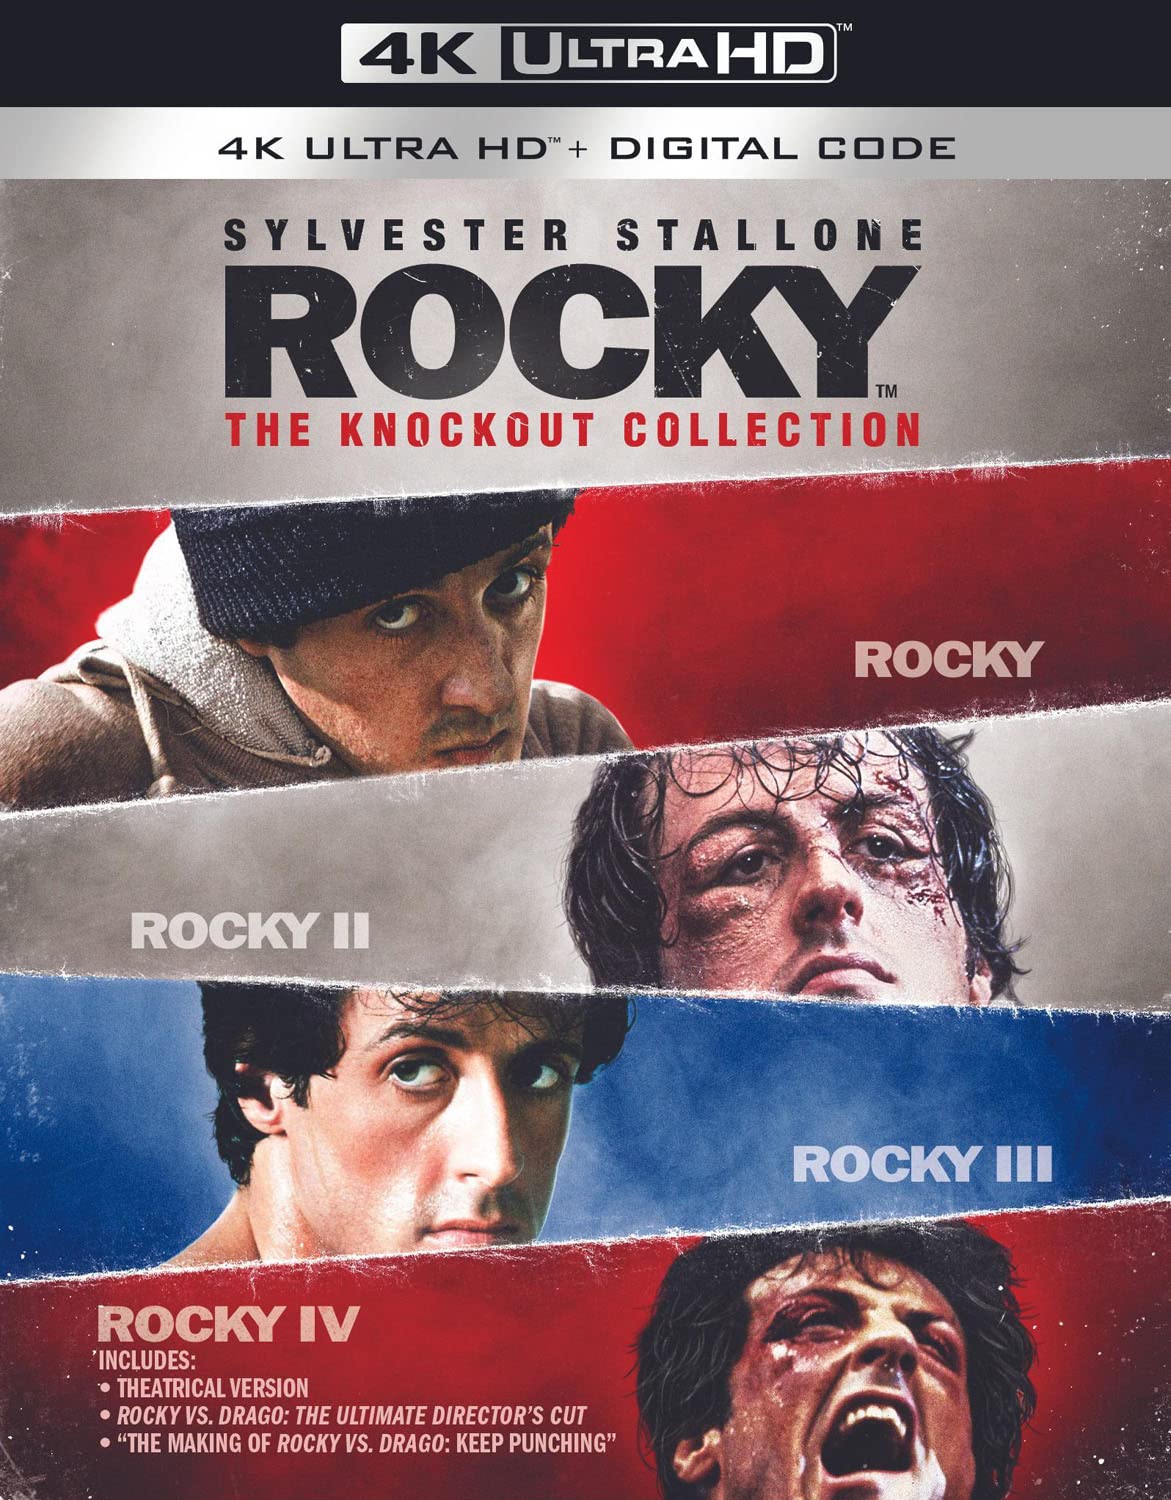 Rocky: The Knockout Collection (4K Ultra HD + Digital) - $59.99 at Amazon